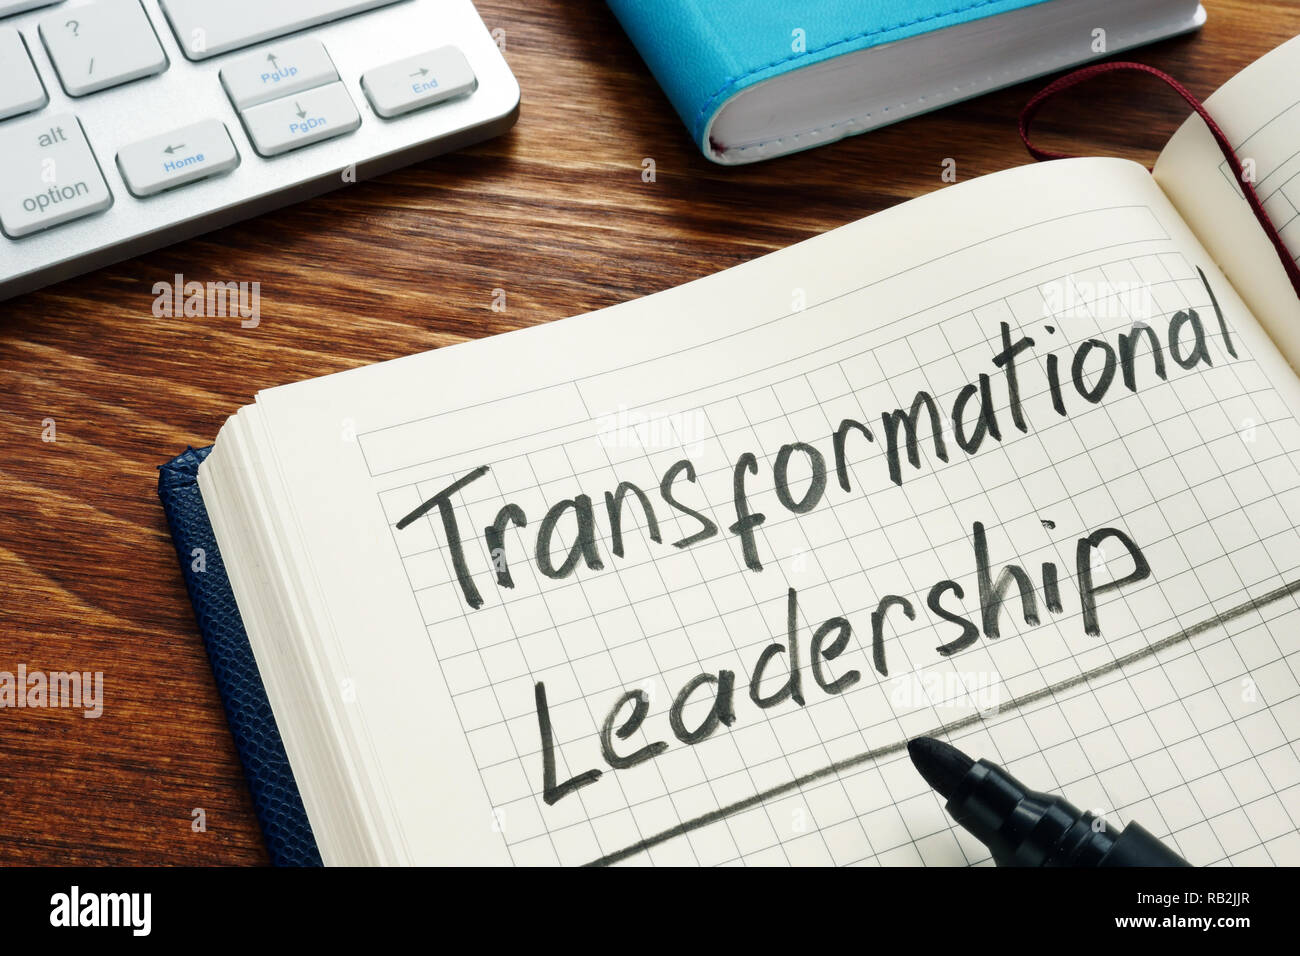 Transformational leadership handwritten in a notepad. Stock Photo